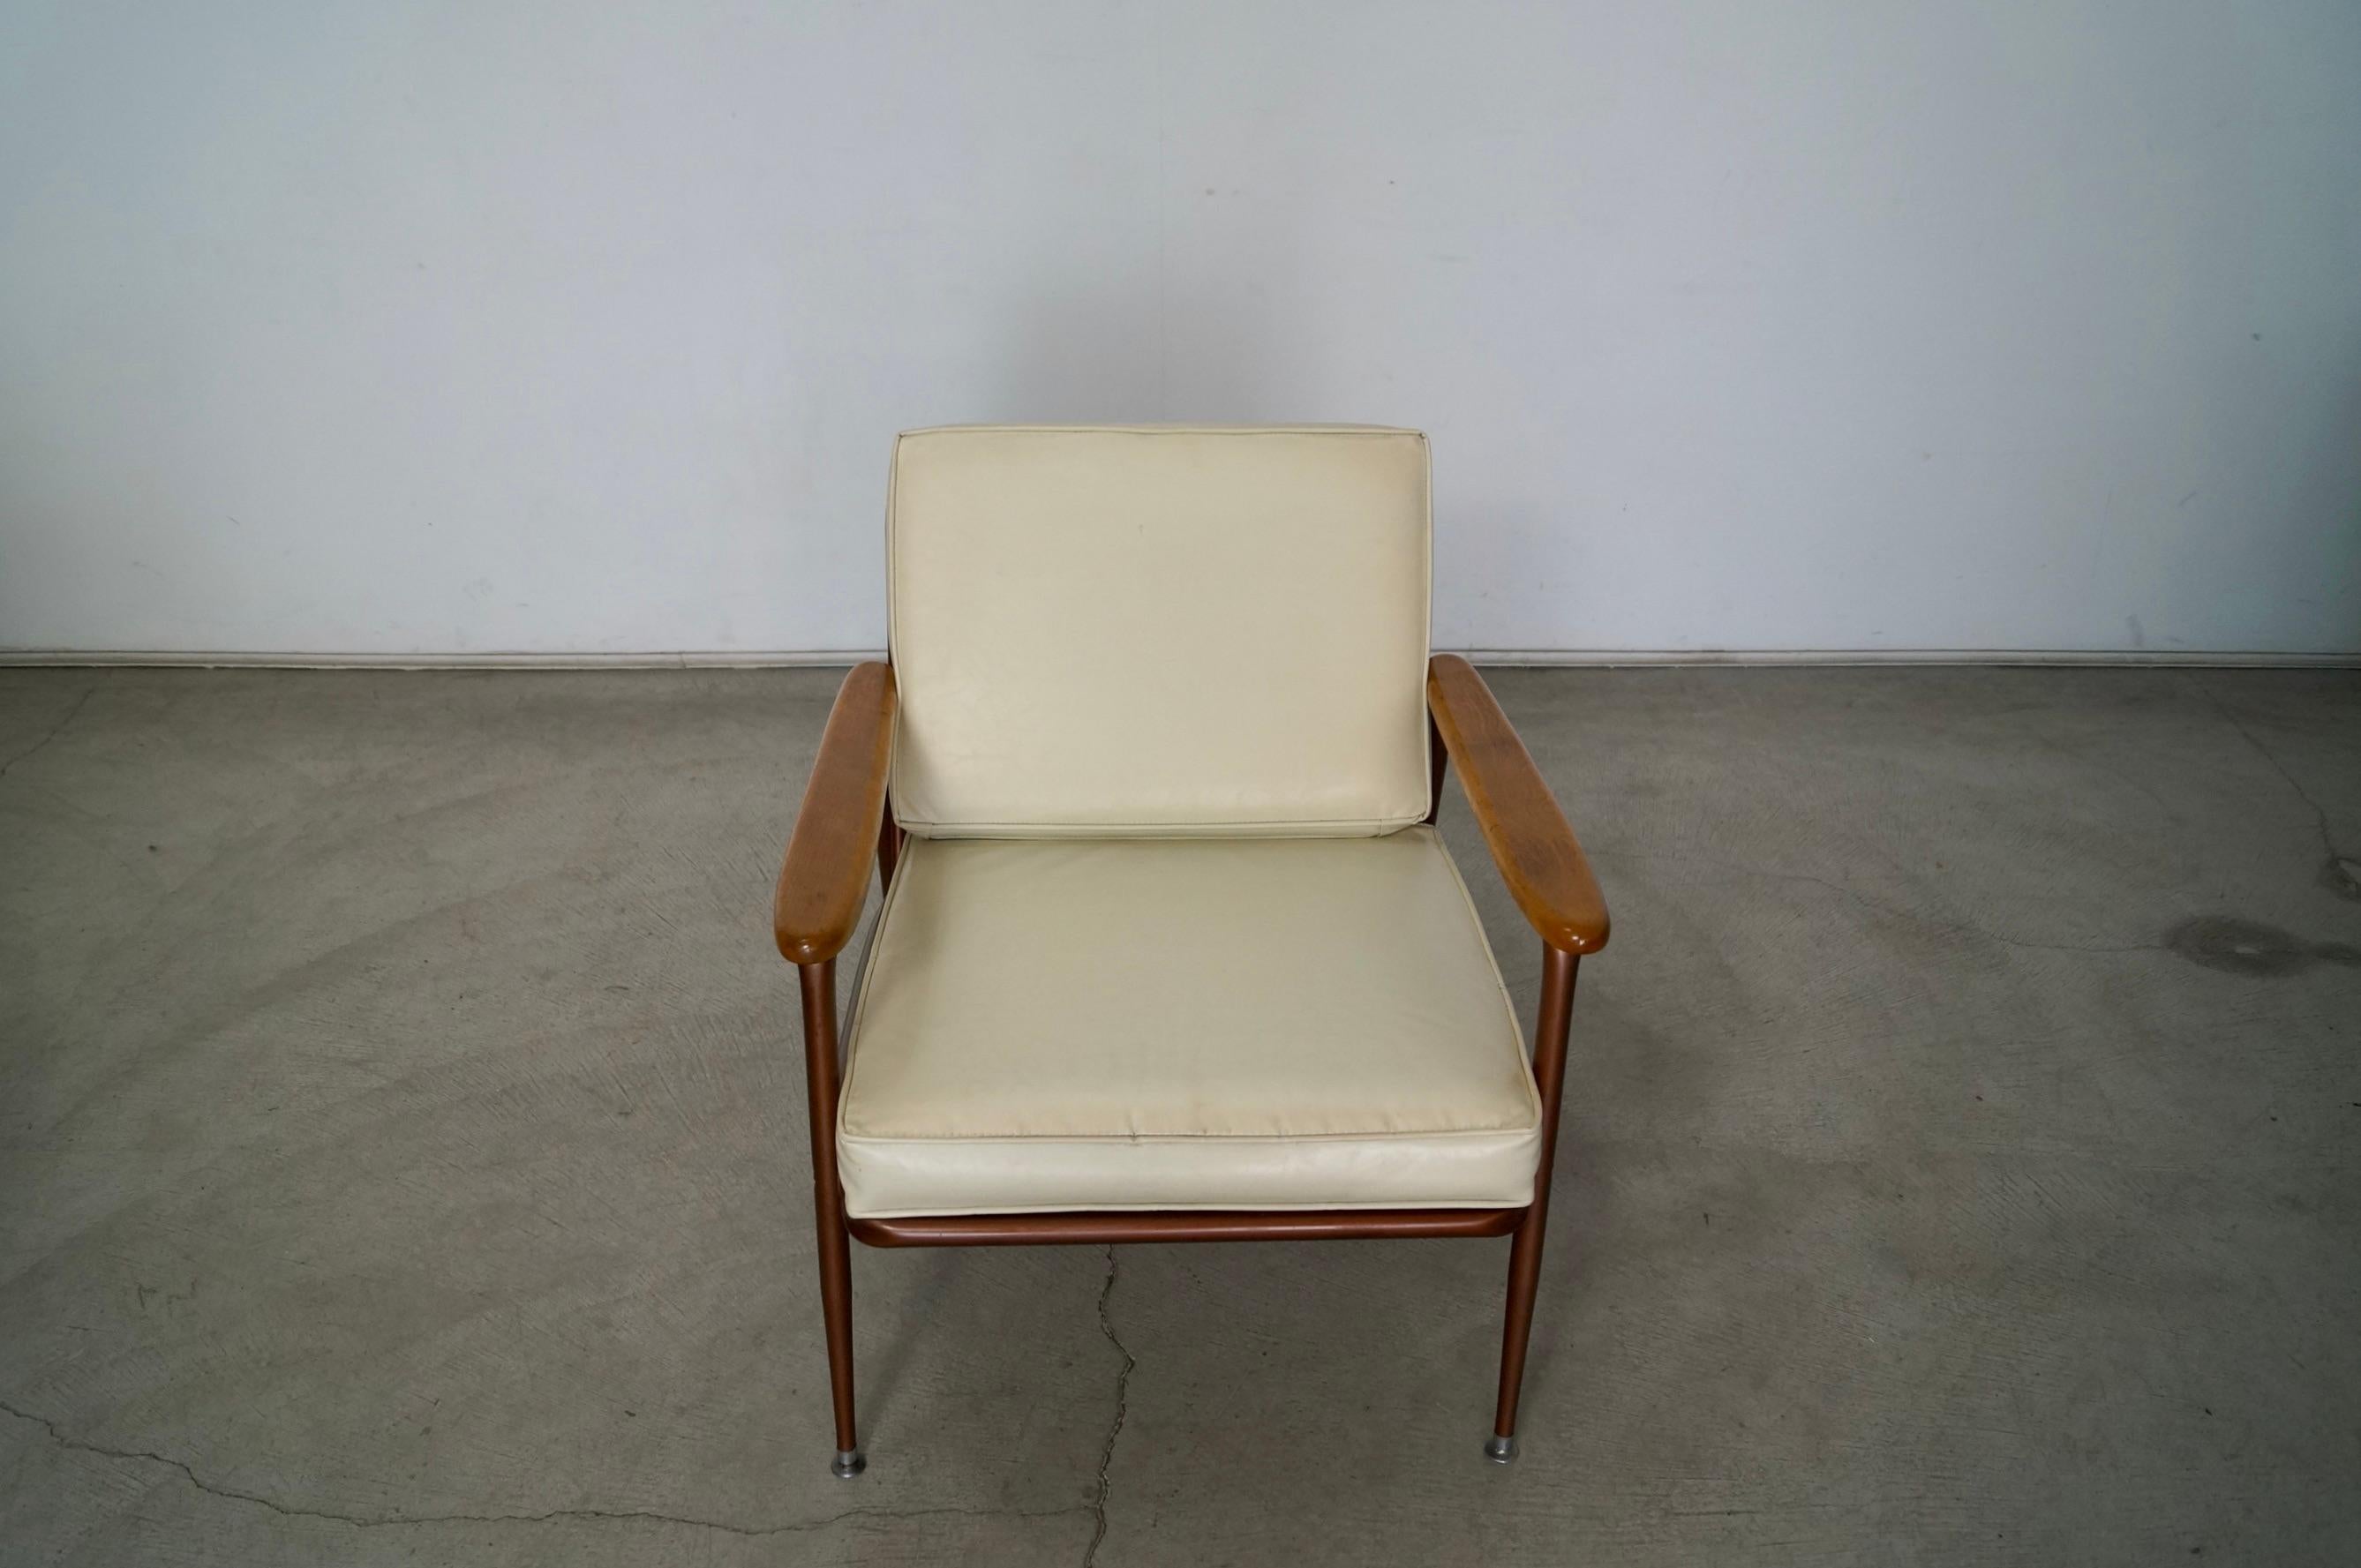 Metal 1950's Mid-Century Modern Baumritter Lounge Chair For Sale